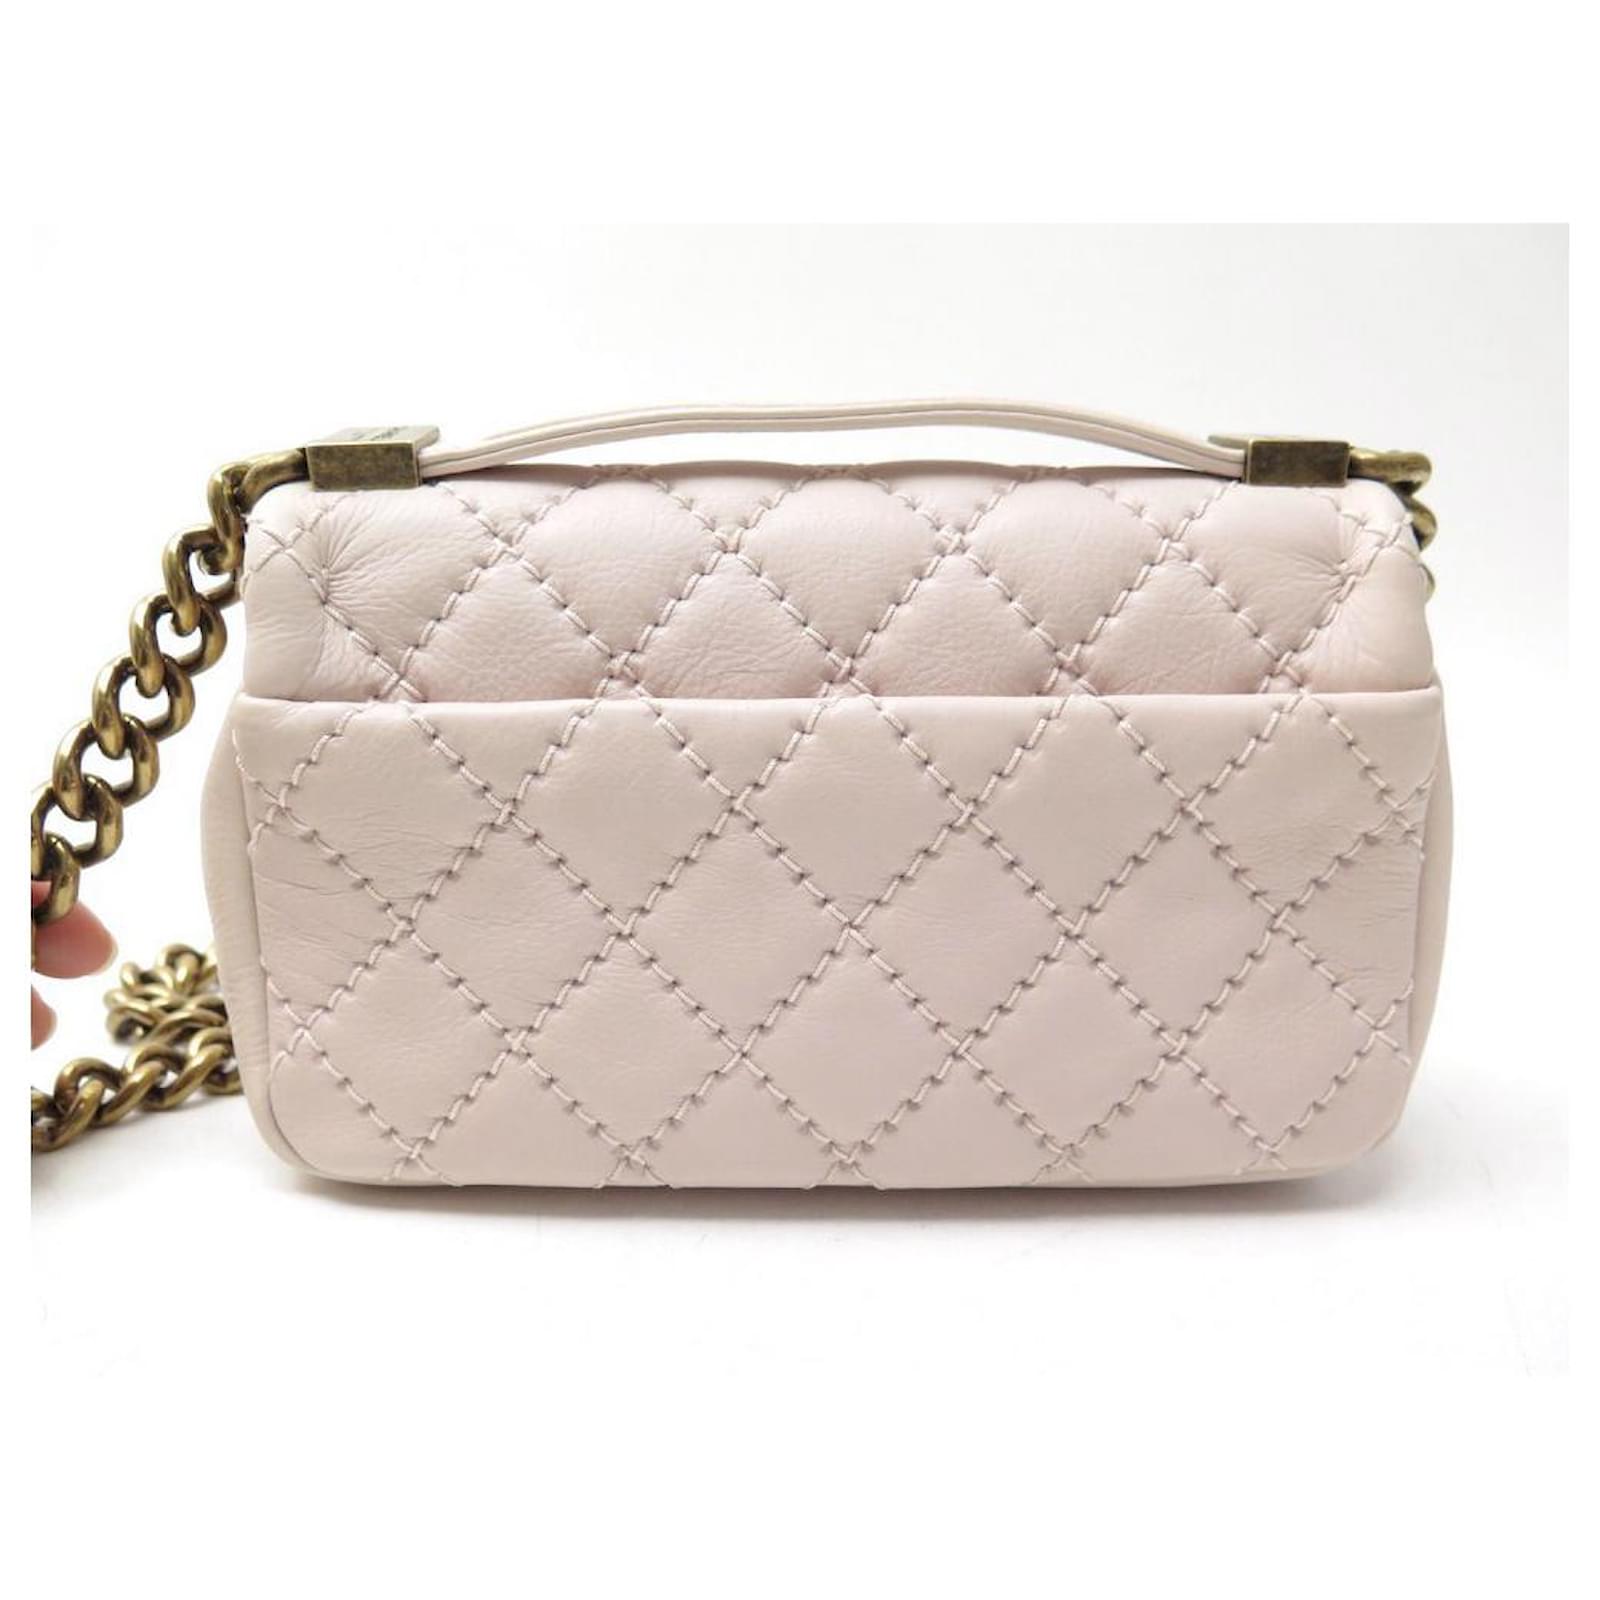 NEW CHANEL MINI TIMELESS HANDBAG PINK LEATHER QUILTED CROSSBODY